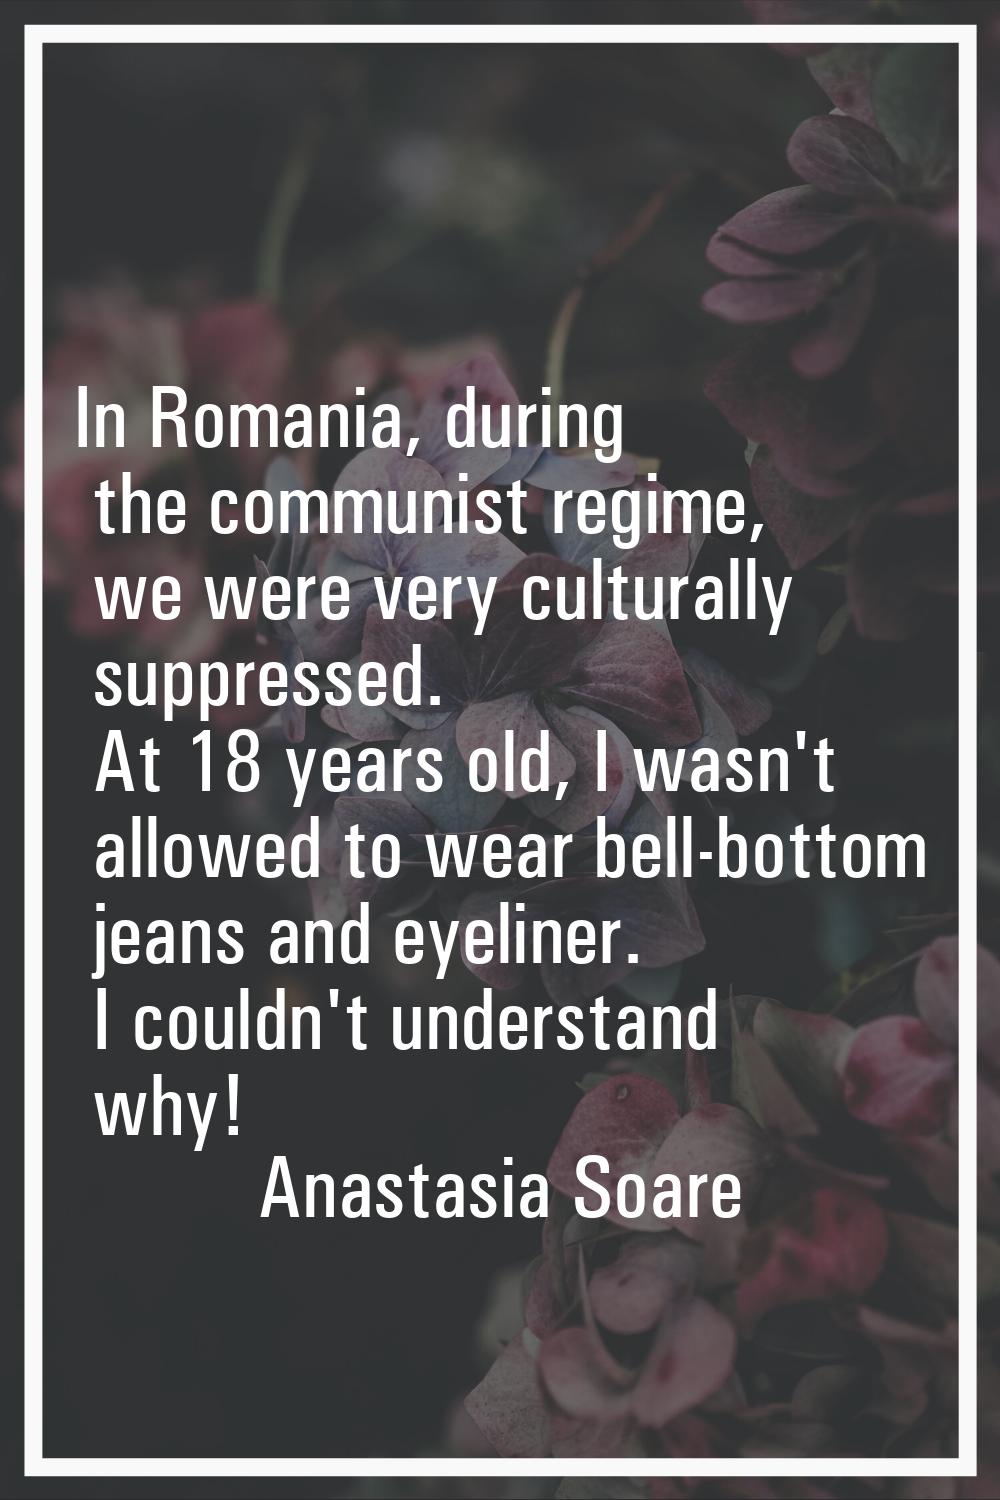 In Romania, during the communist regime, we were very culturally suppressed. At 18 years old, I was